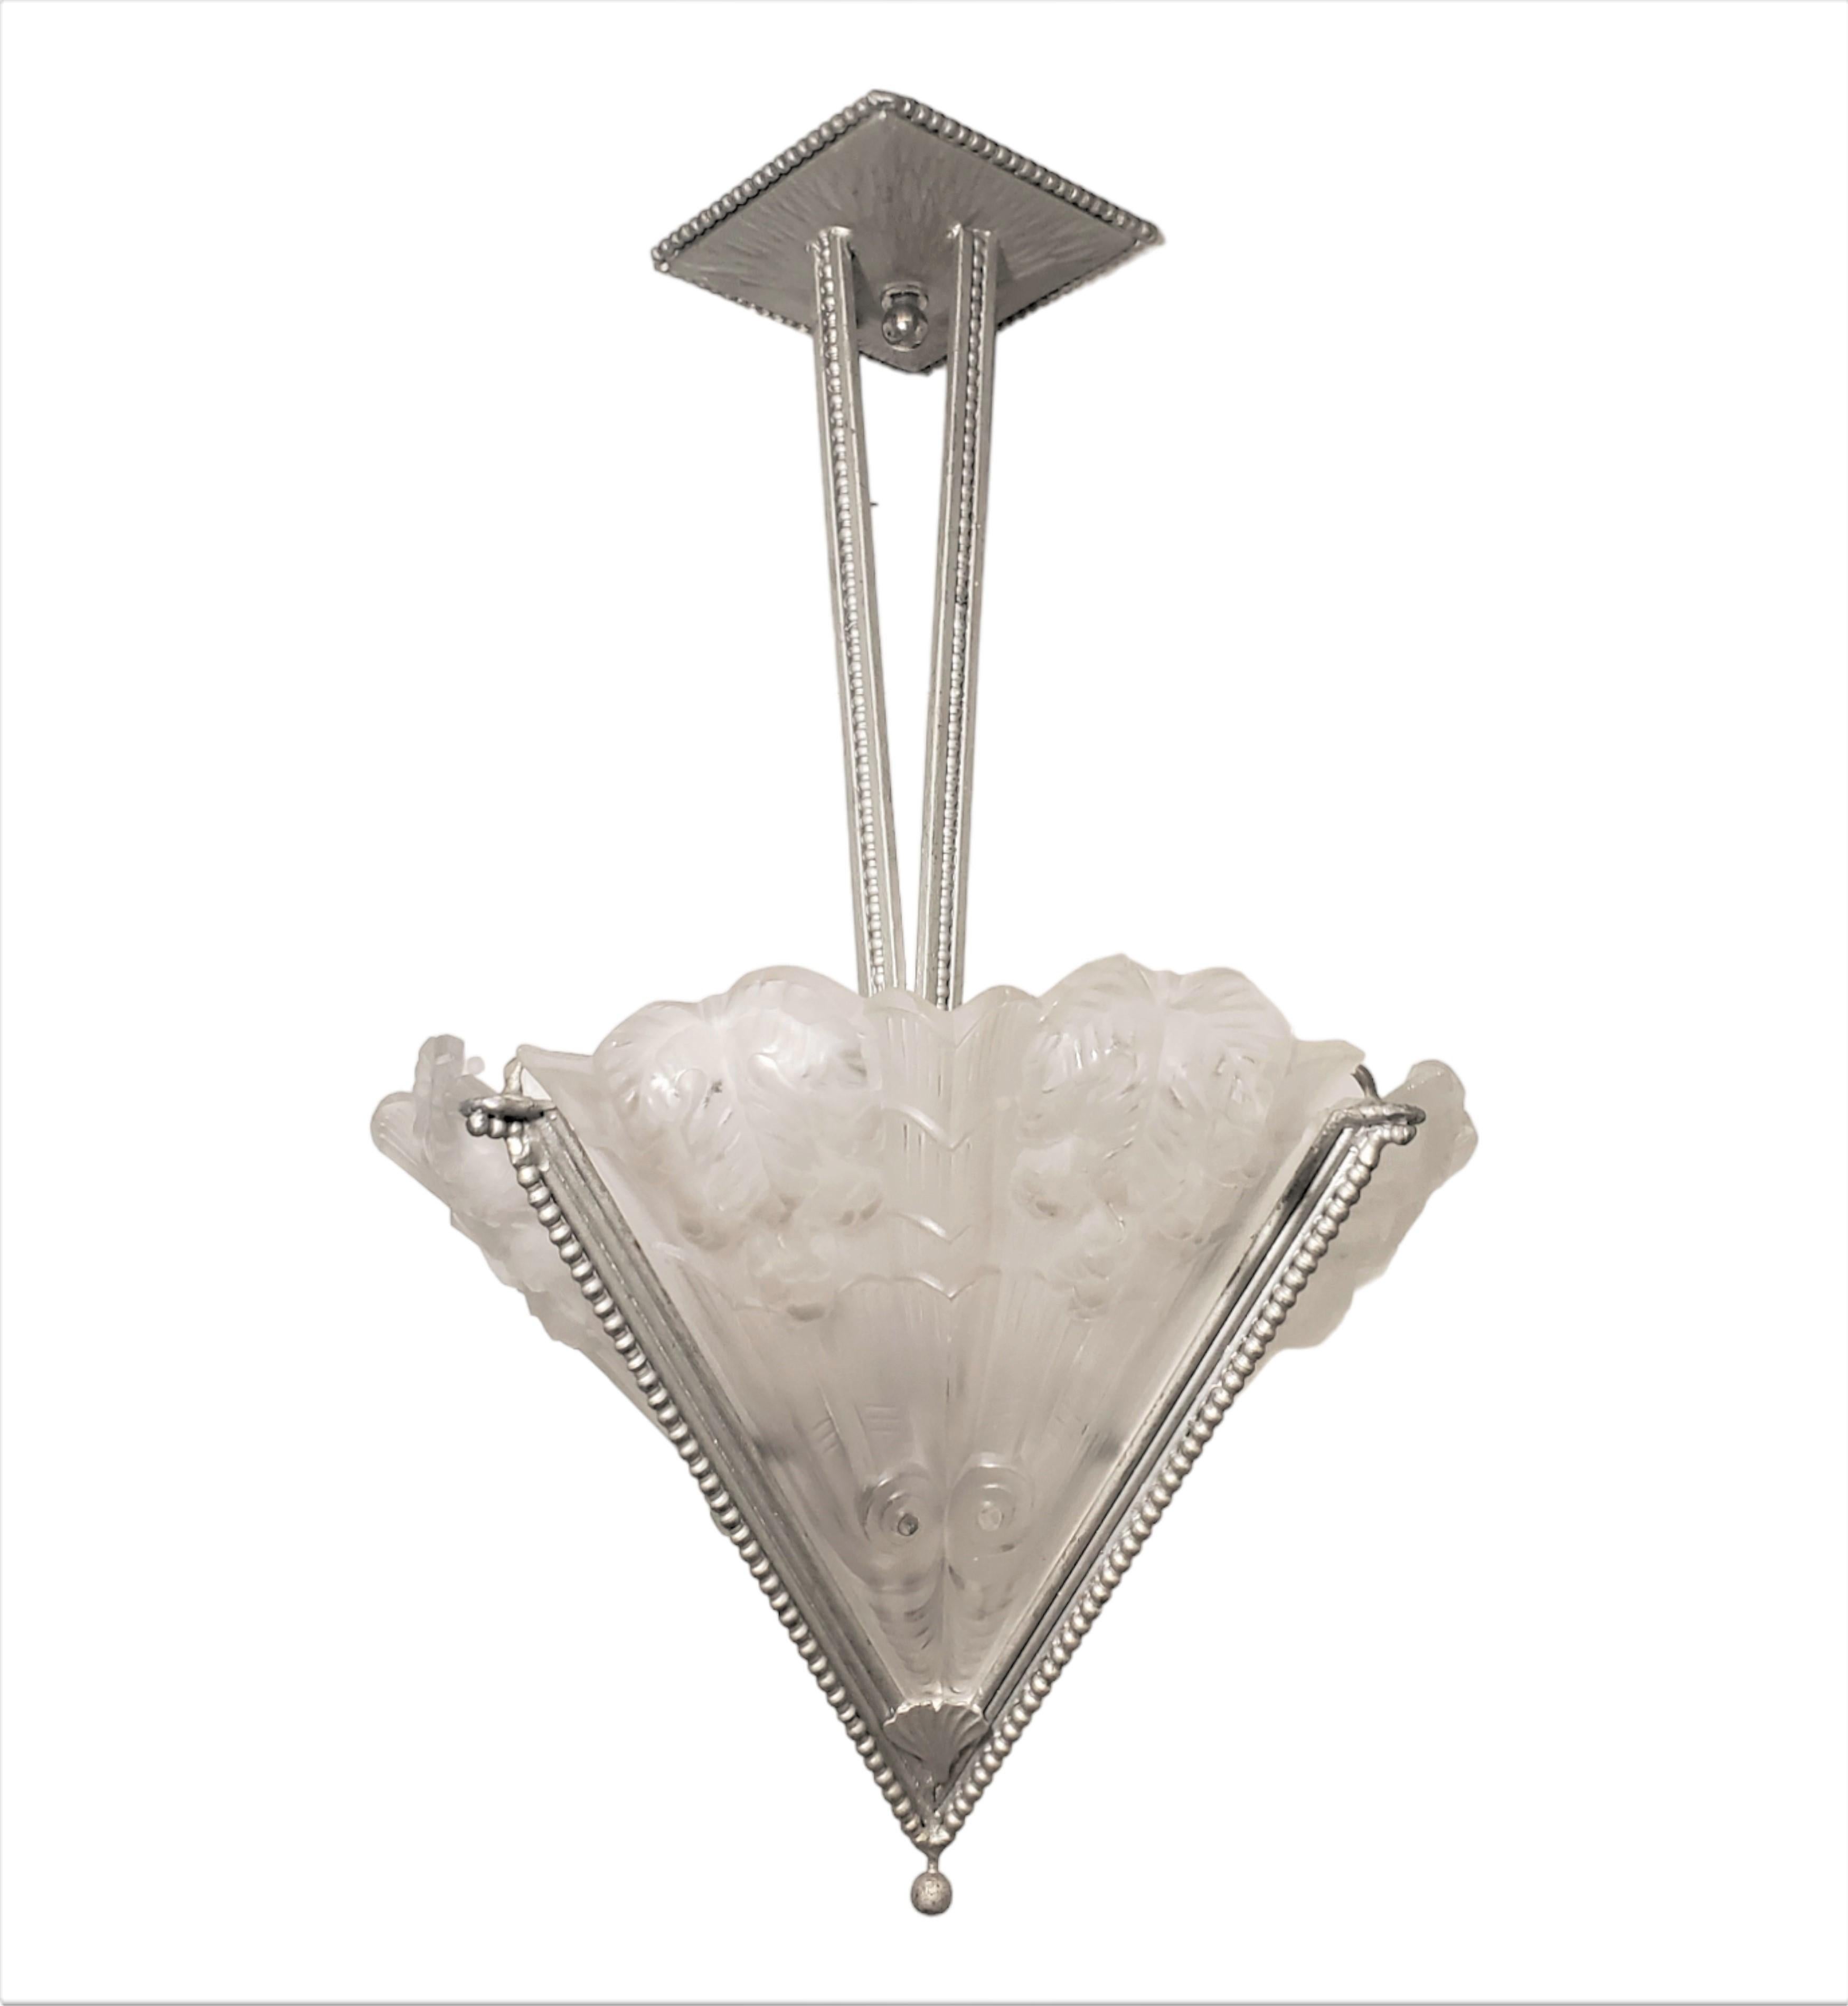 Lovely and delicate French Art Deco frosted art glass blossom chandelier signed Noverdy, France depose. Its distinctive design comprises four 